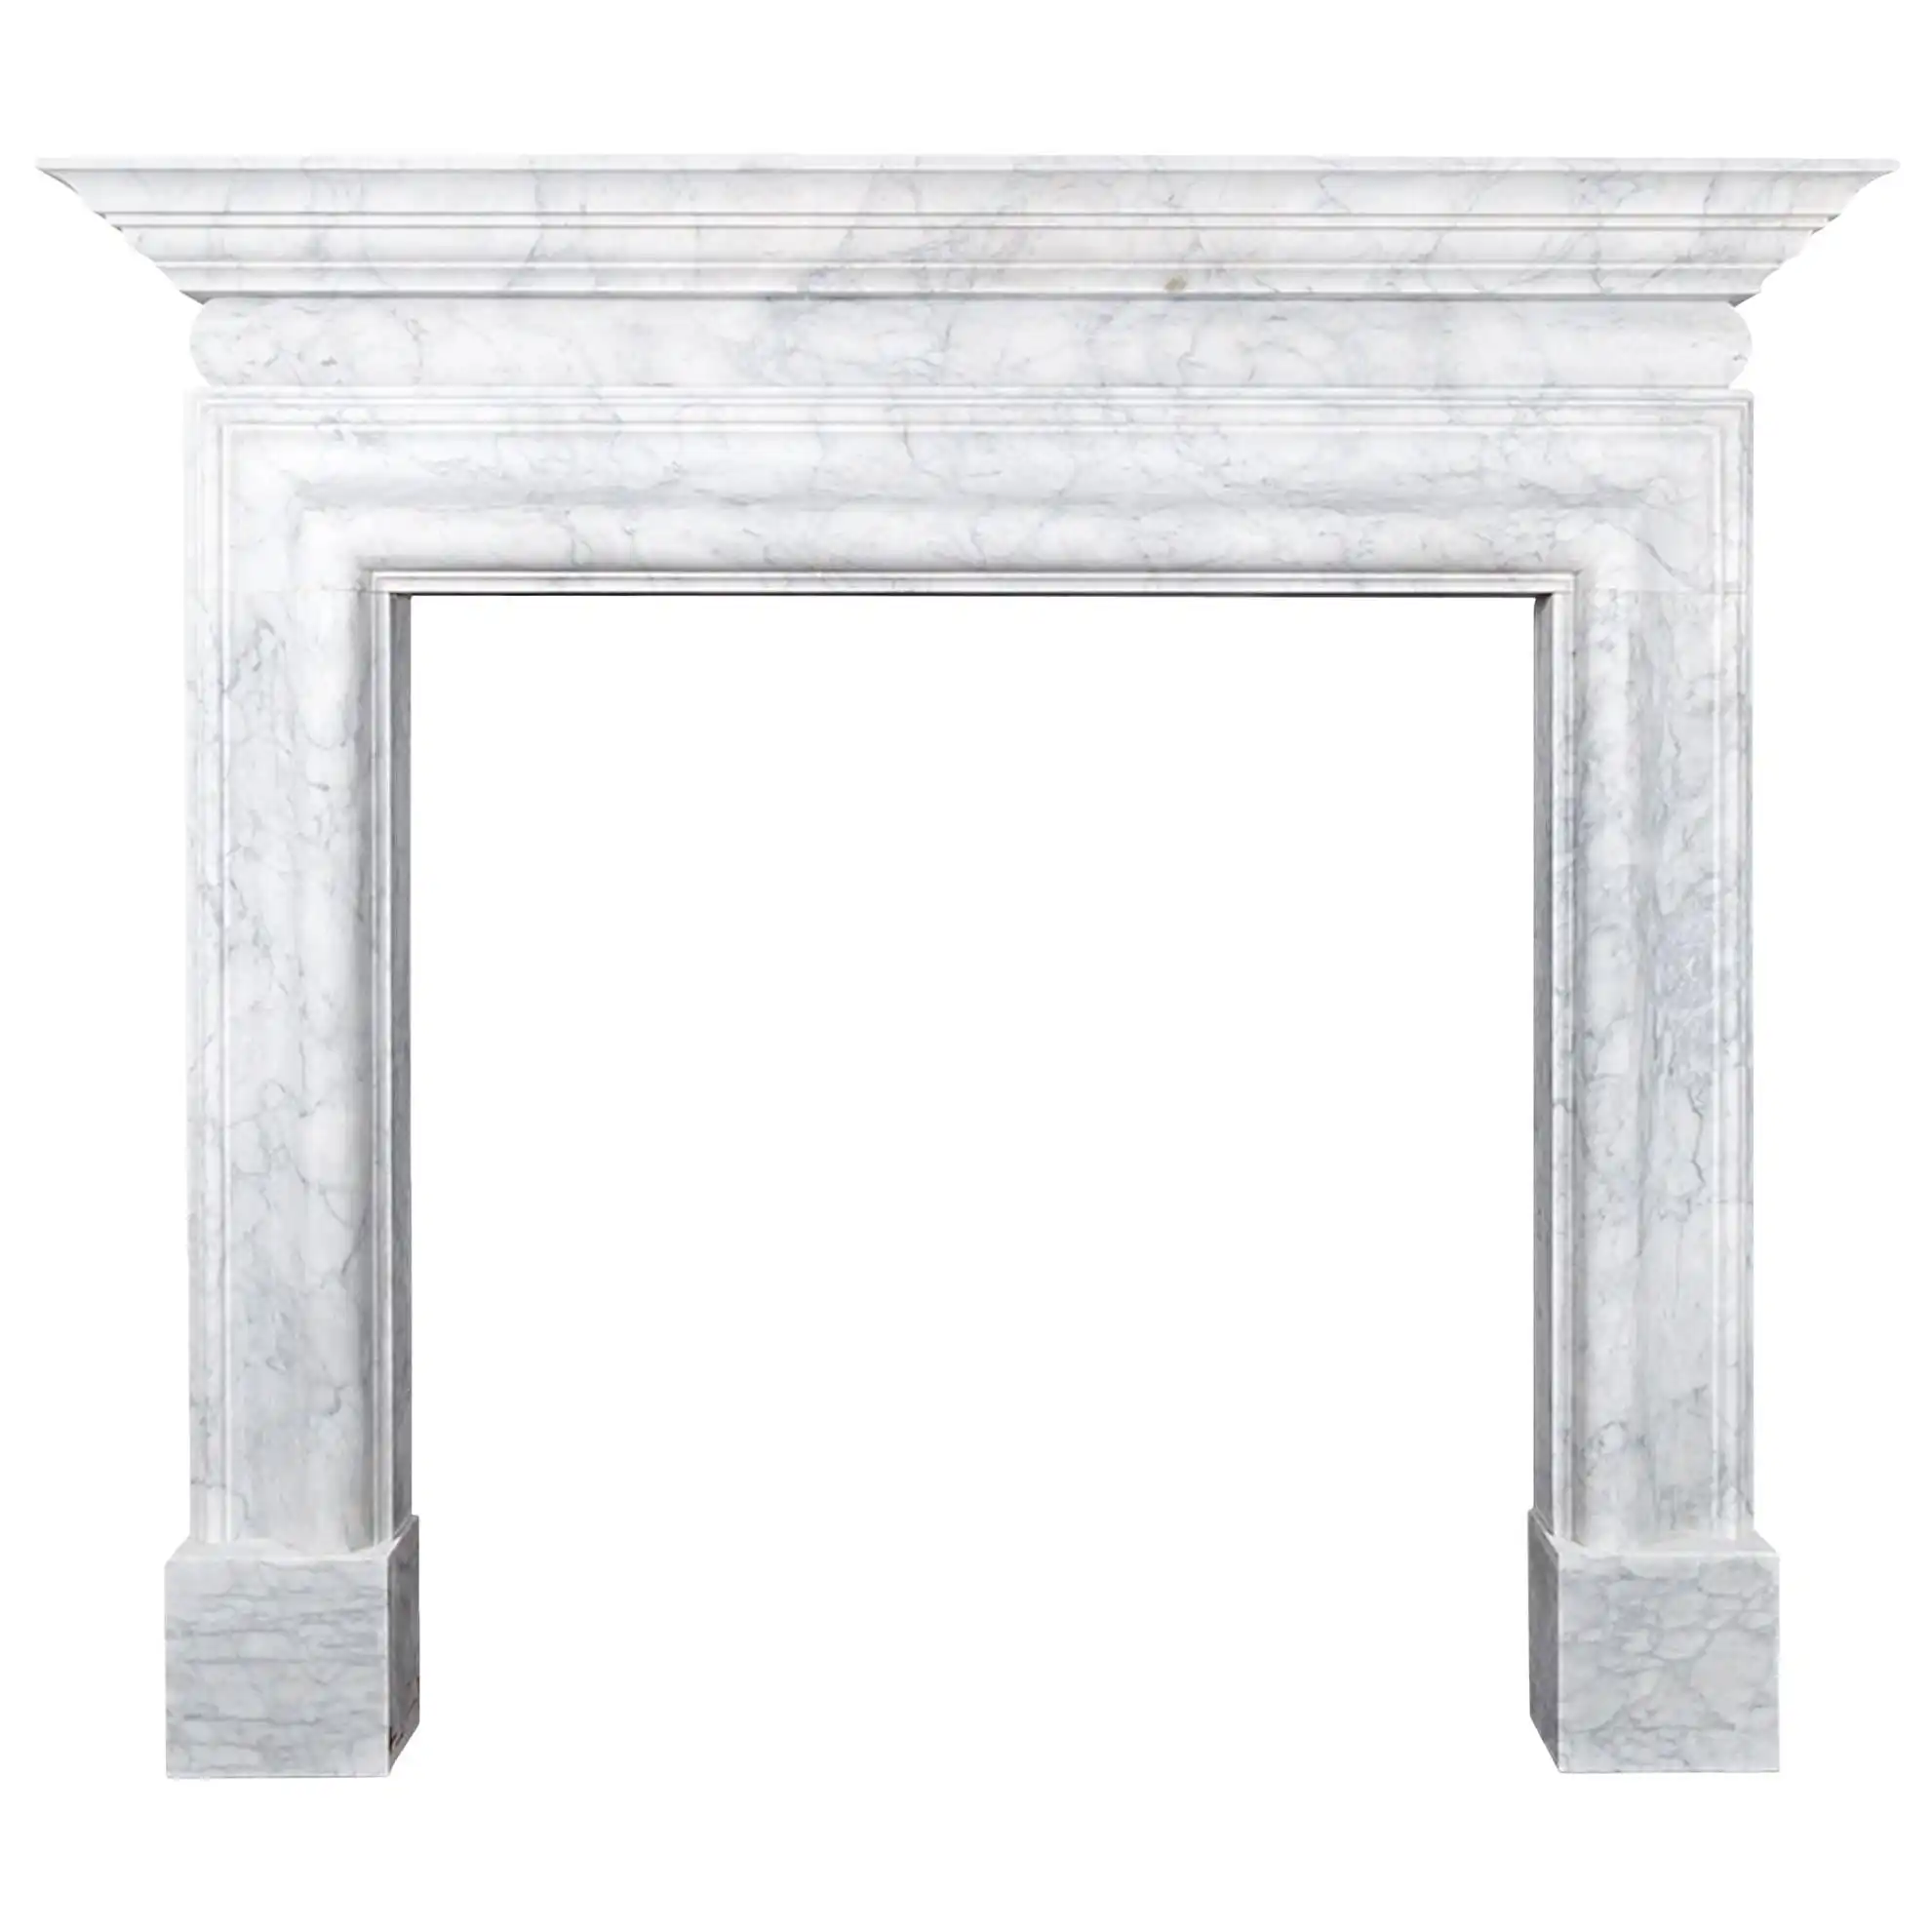 Classic Popular Marble Medallion Stone Fireplace Delicate Natural Stone Marble Electric Fireplace Carving With Cad Drawings